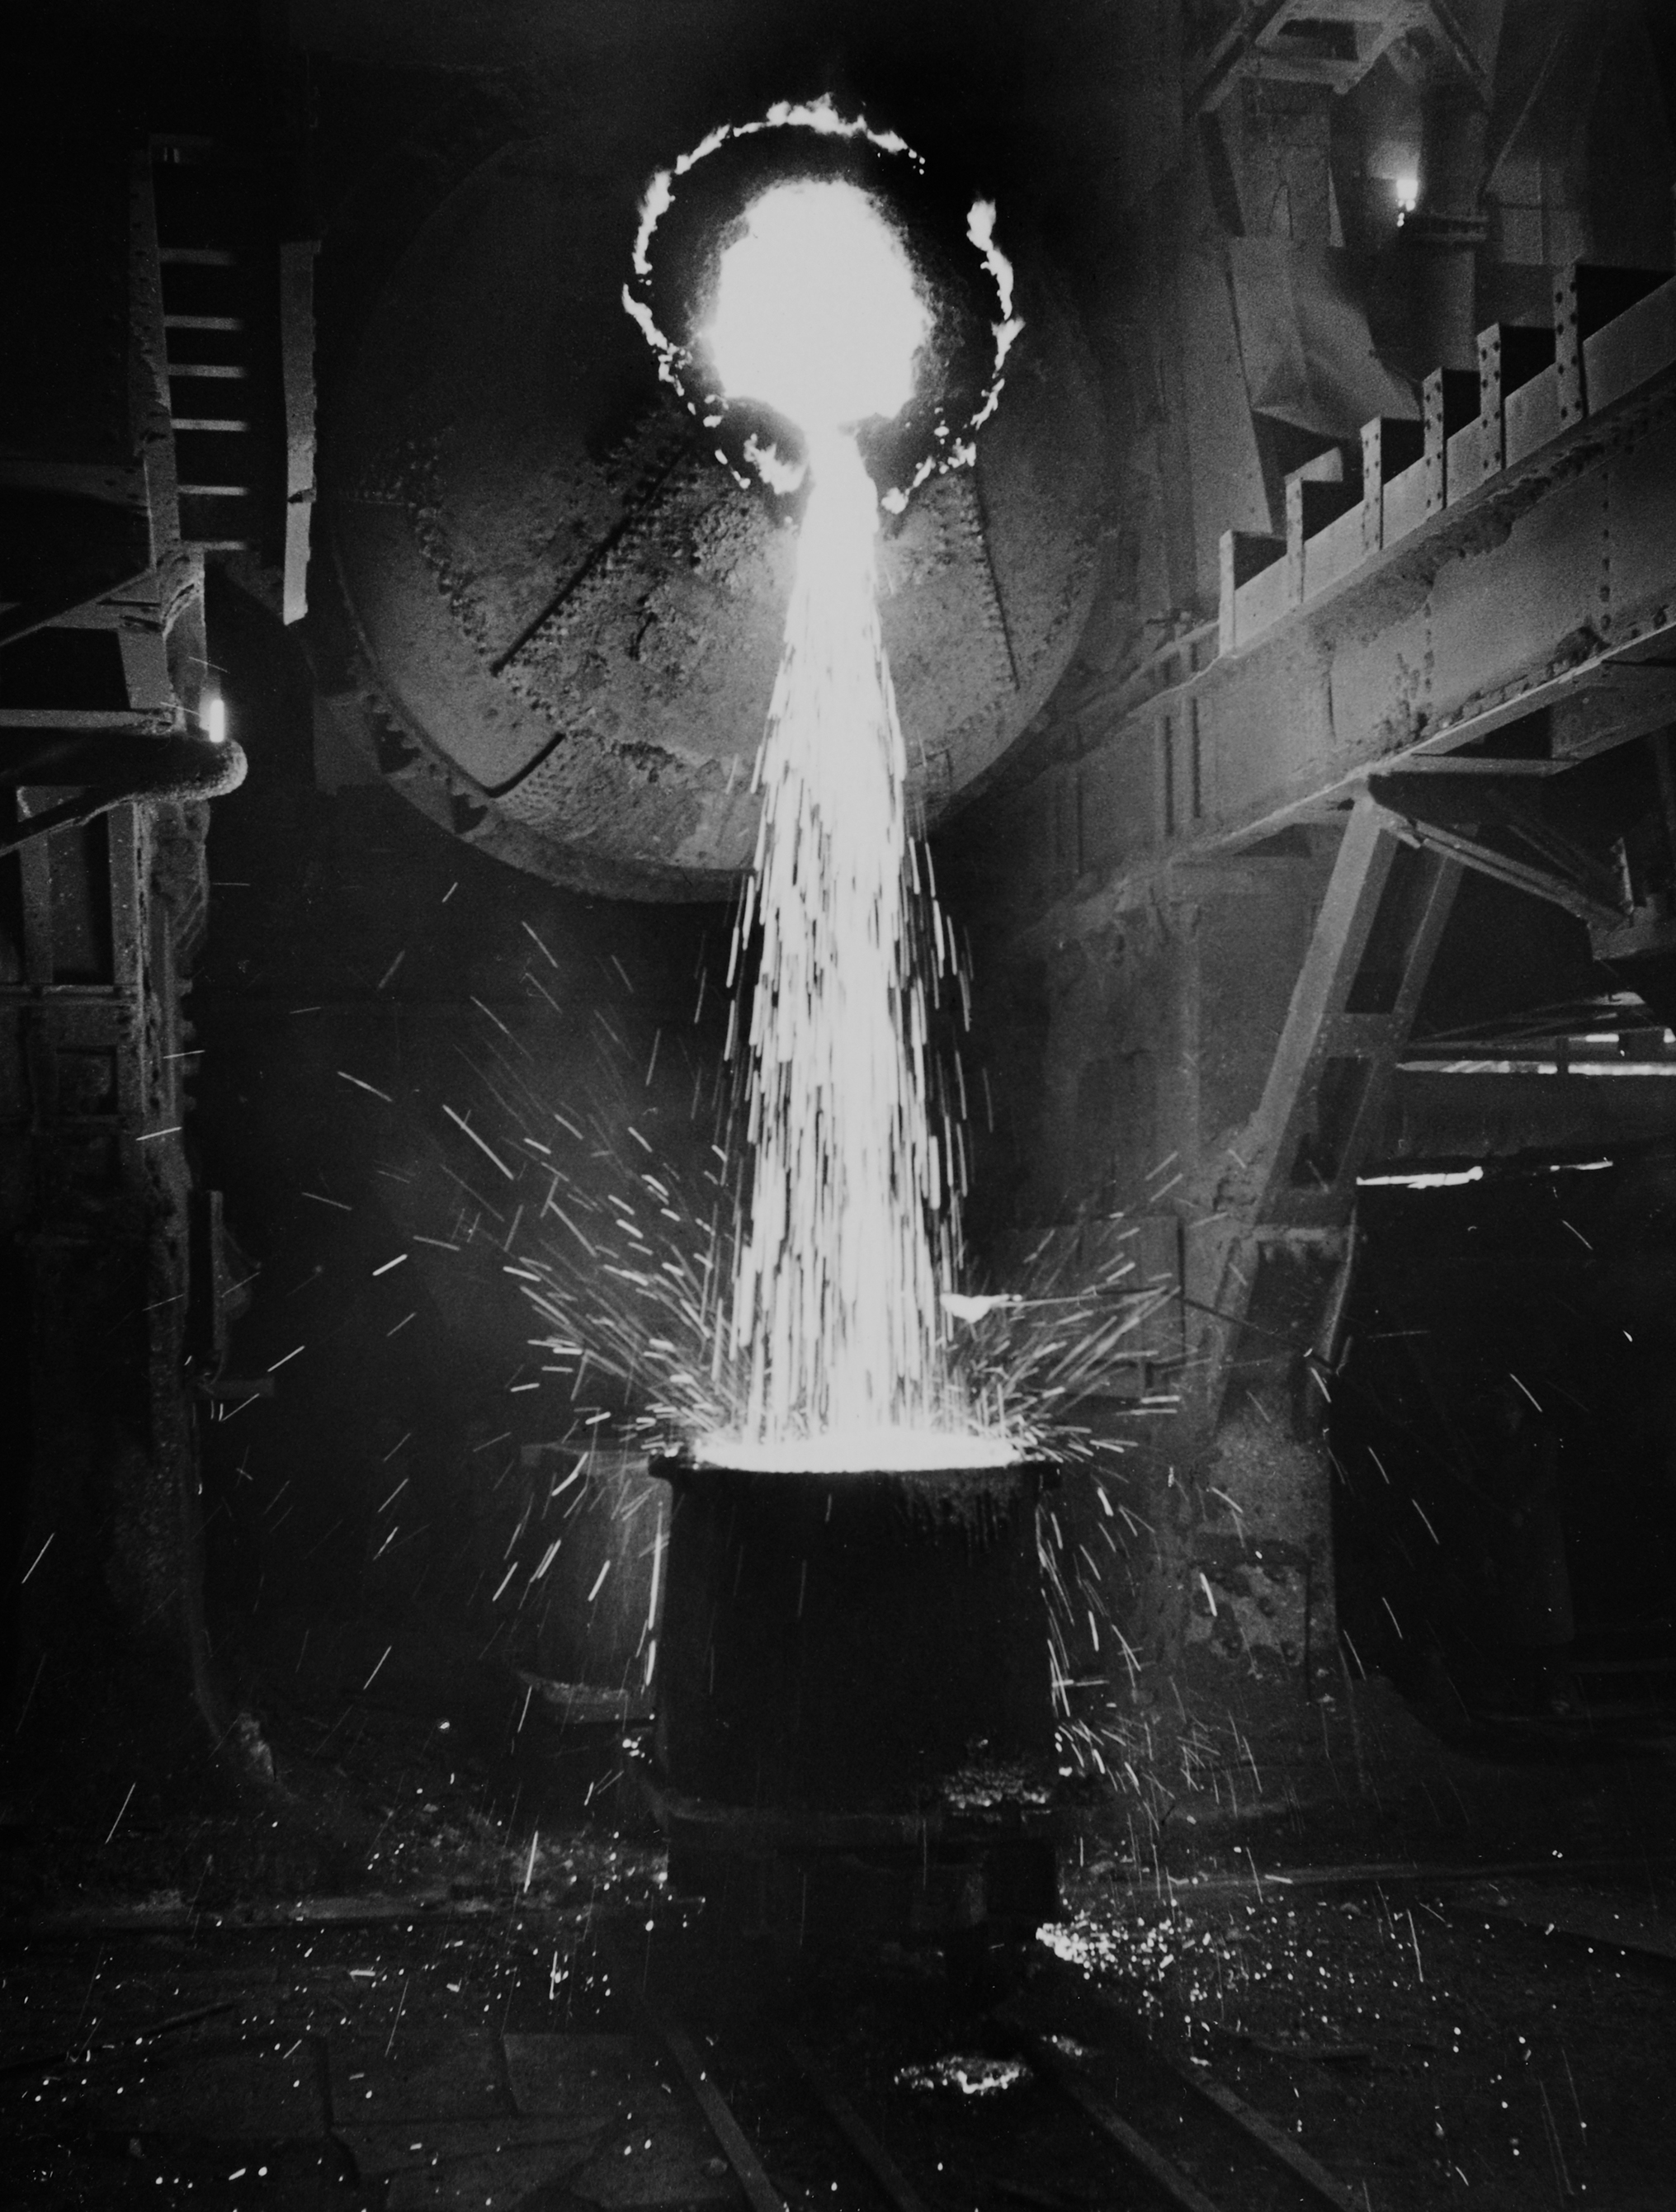 Slag tapping. Black and white photo of liquid flowing down from a round pipe into a barrel. 